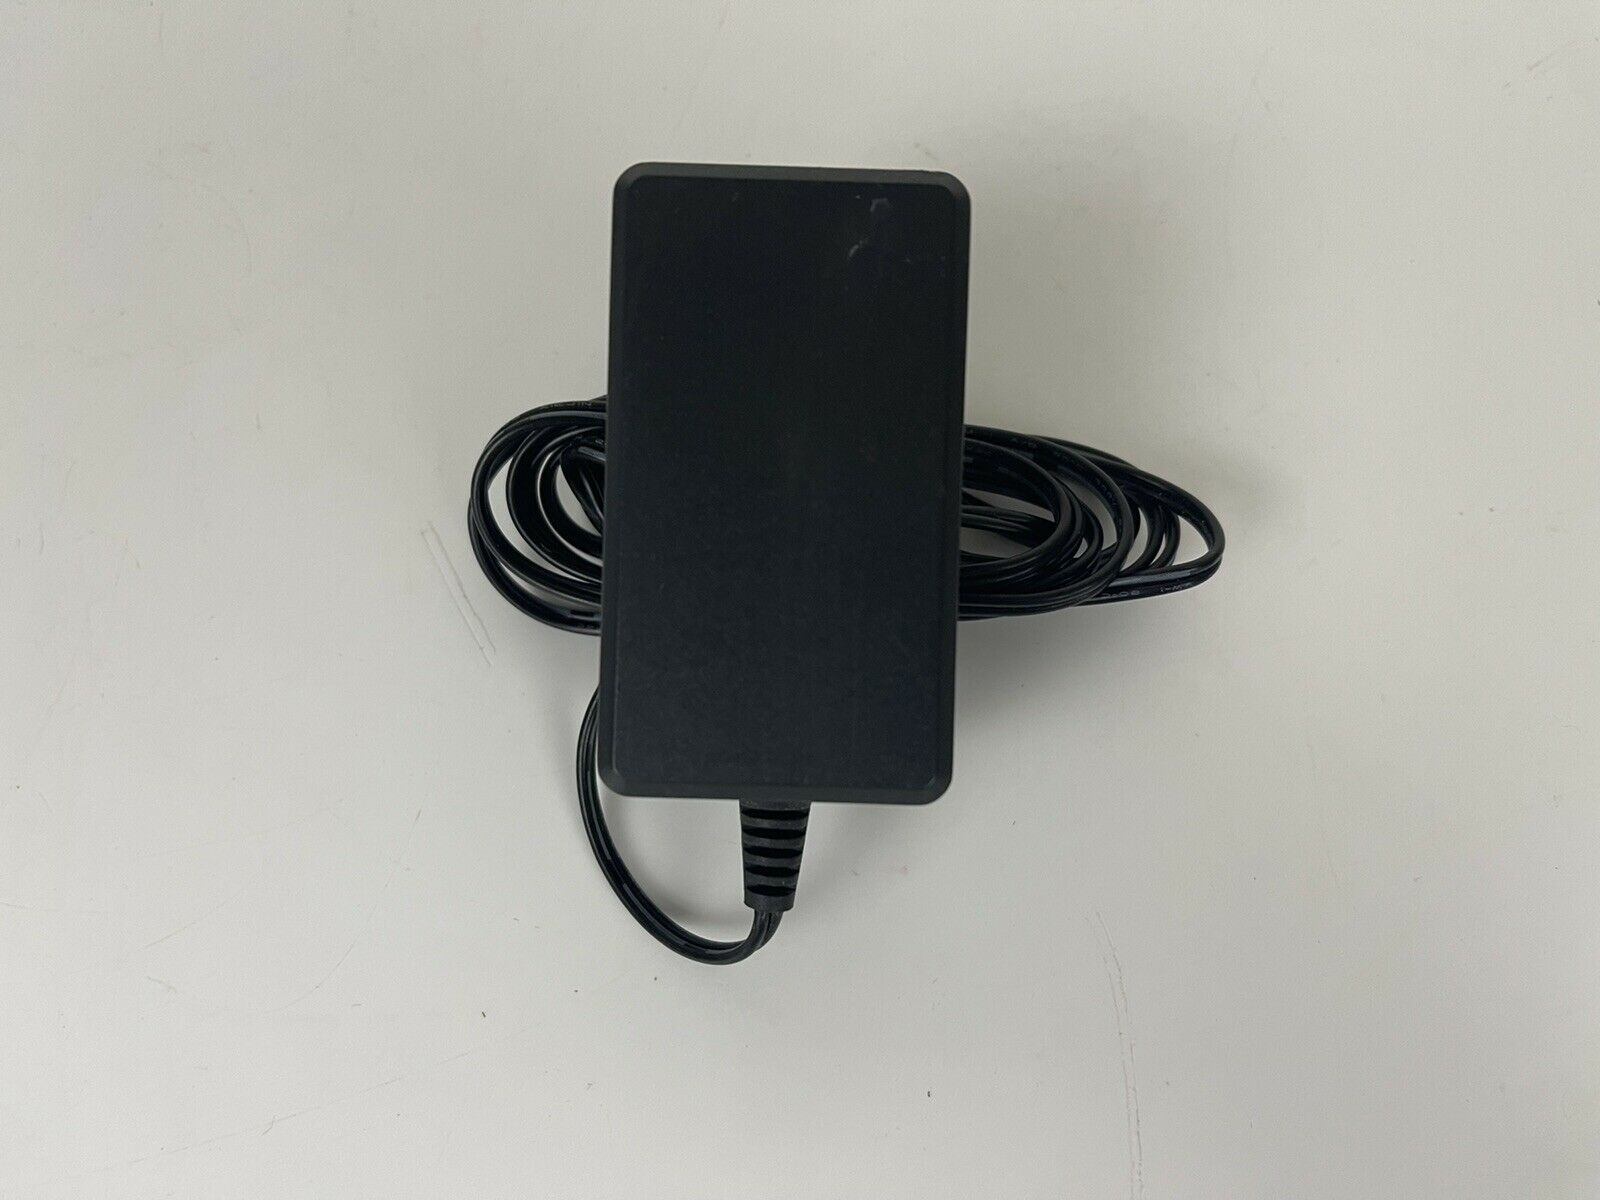 Mitra Switching Adapter MP12N-240050-AU 24V 0.5A Brand: MITRA Type: Adapter Connection Split/Duplication: 1:2 Feat